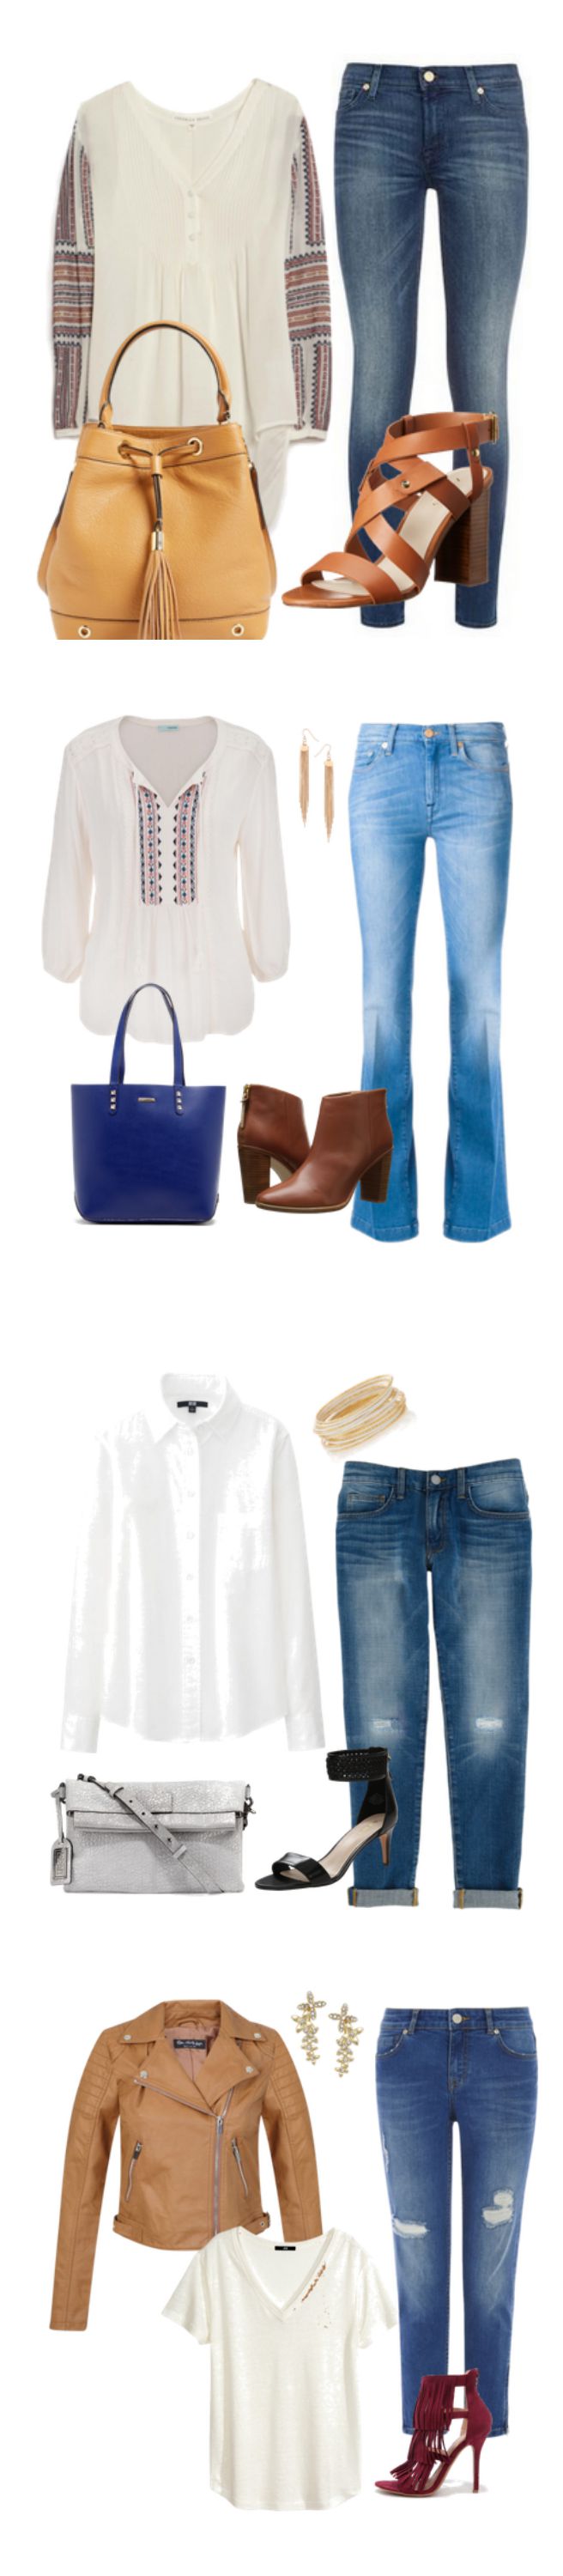 Cute Outfit Ideas of the Week #61 - Fall Denim Outfits